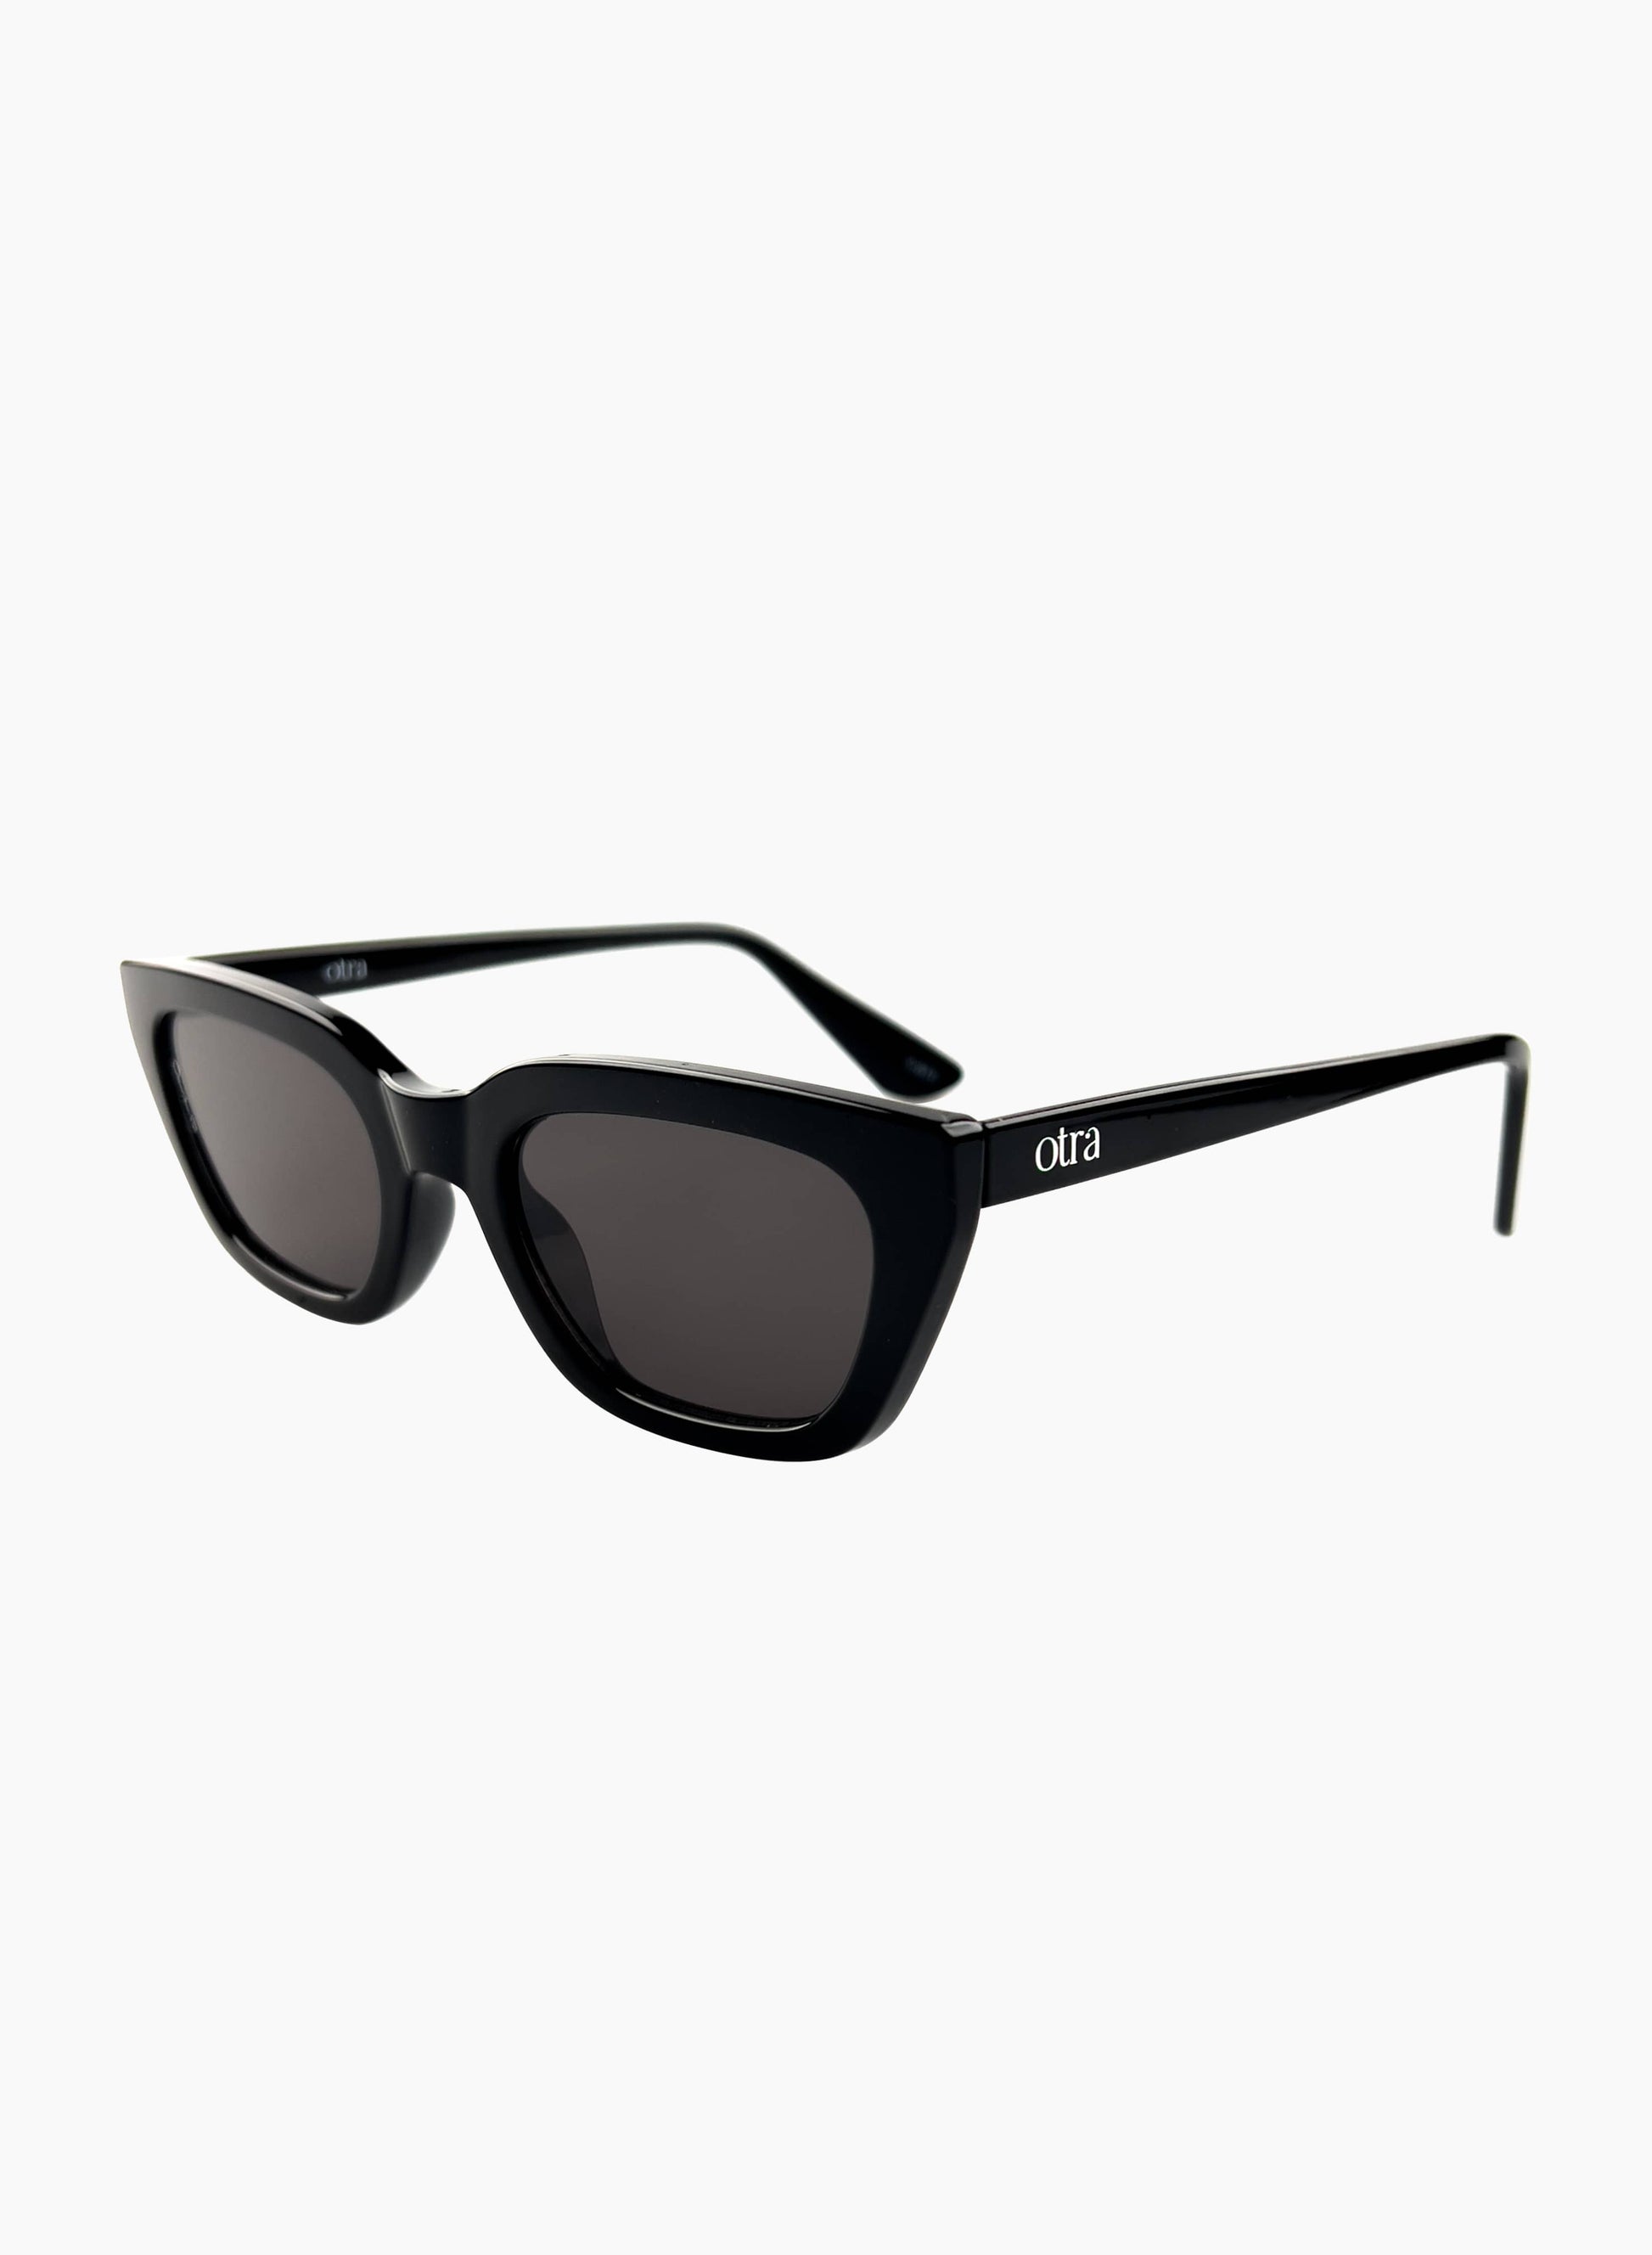 Side view of Nove sunglasses featuring a black cat eye frame and black lenses